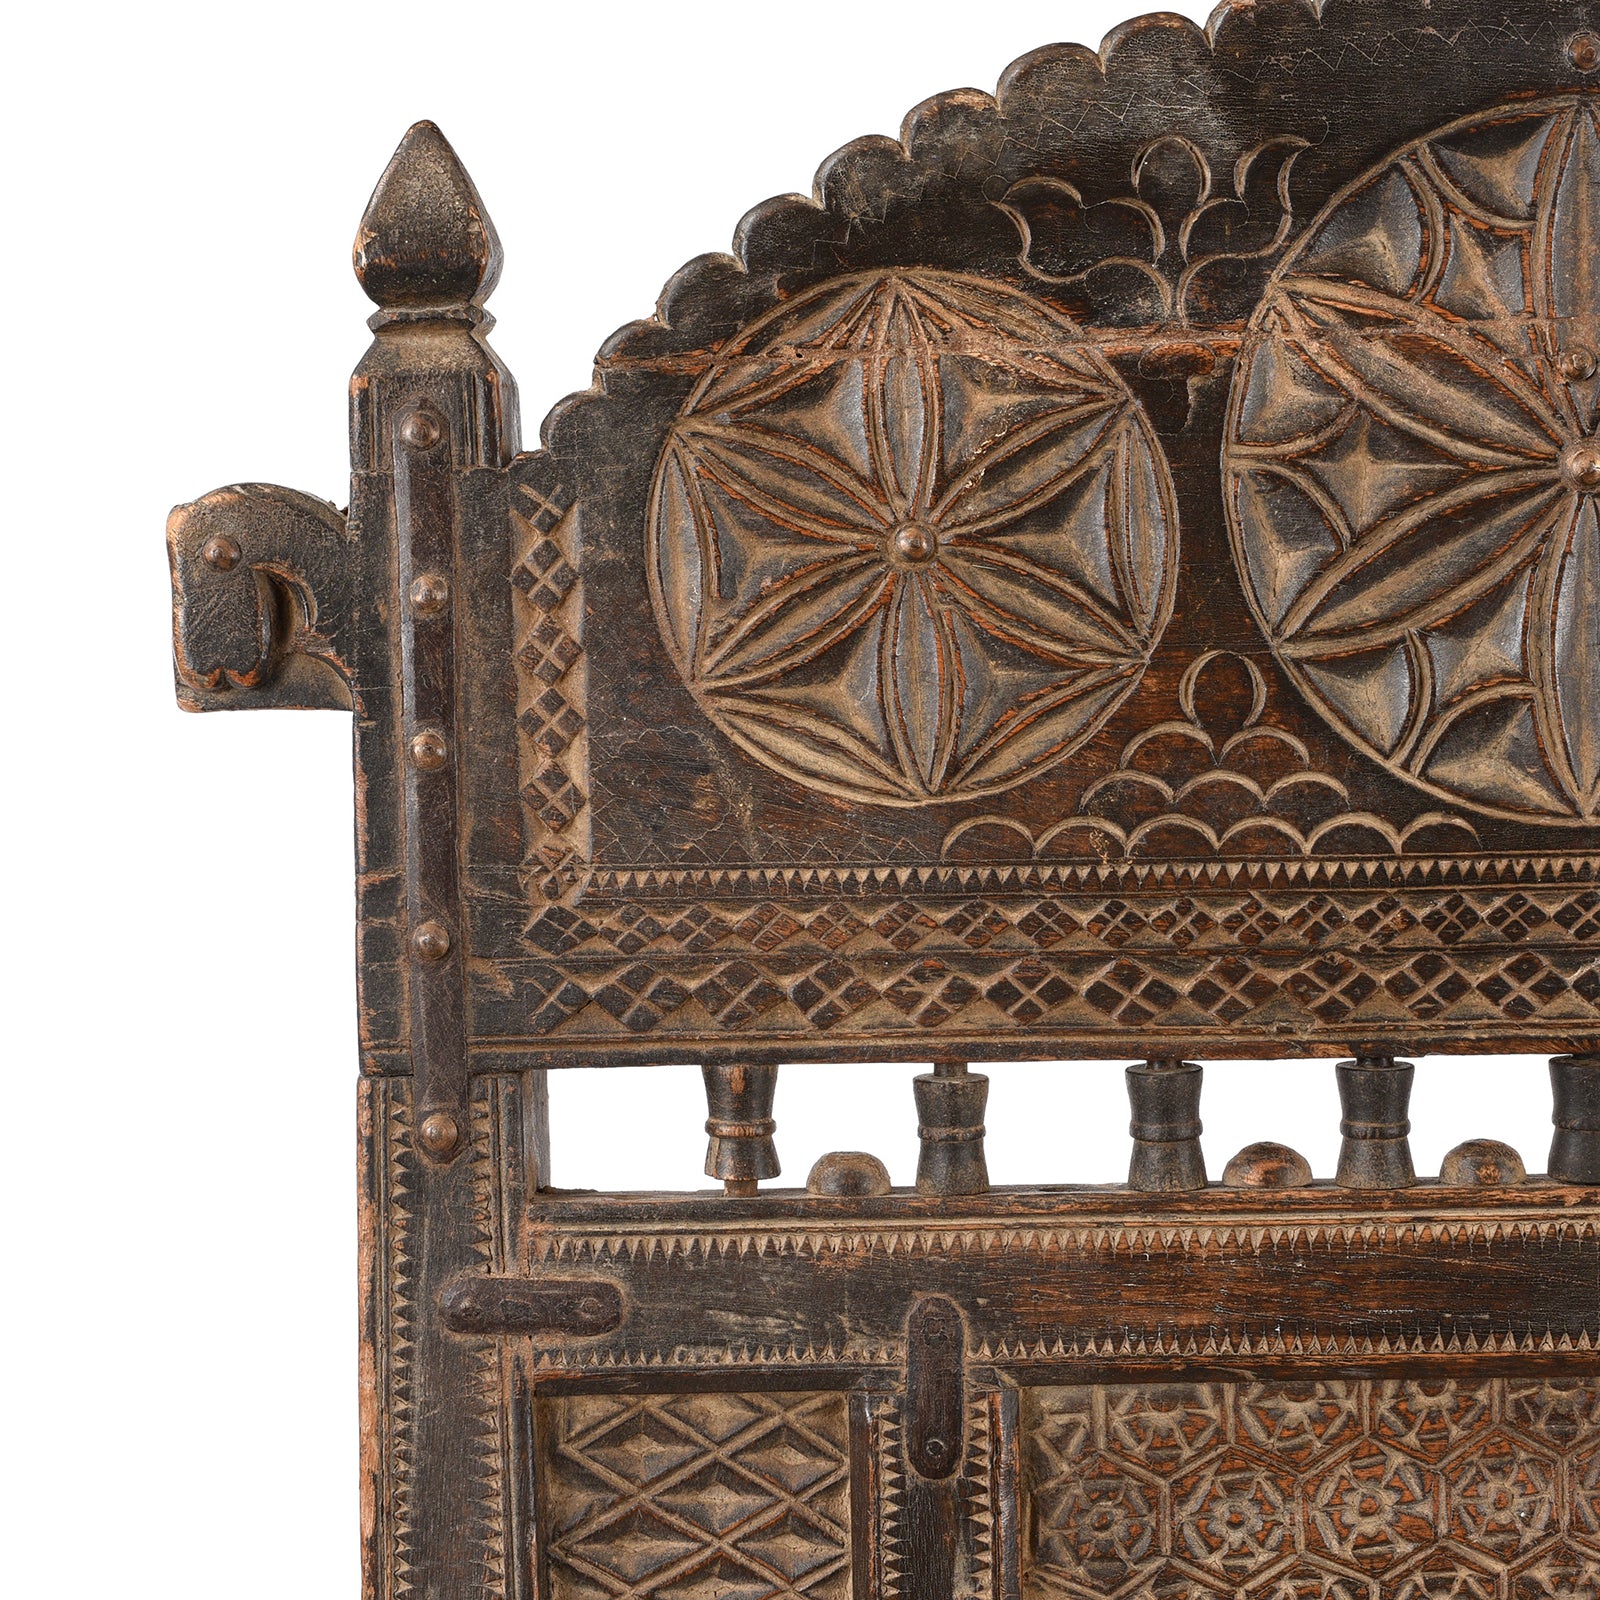 Antique Chip Carved Indian Low Pidha Chair From Rajasthan | INDIGO ANTIQUES